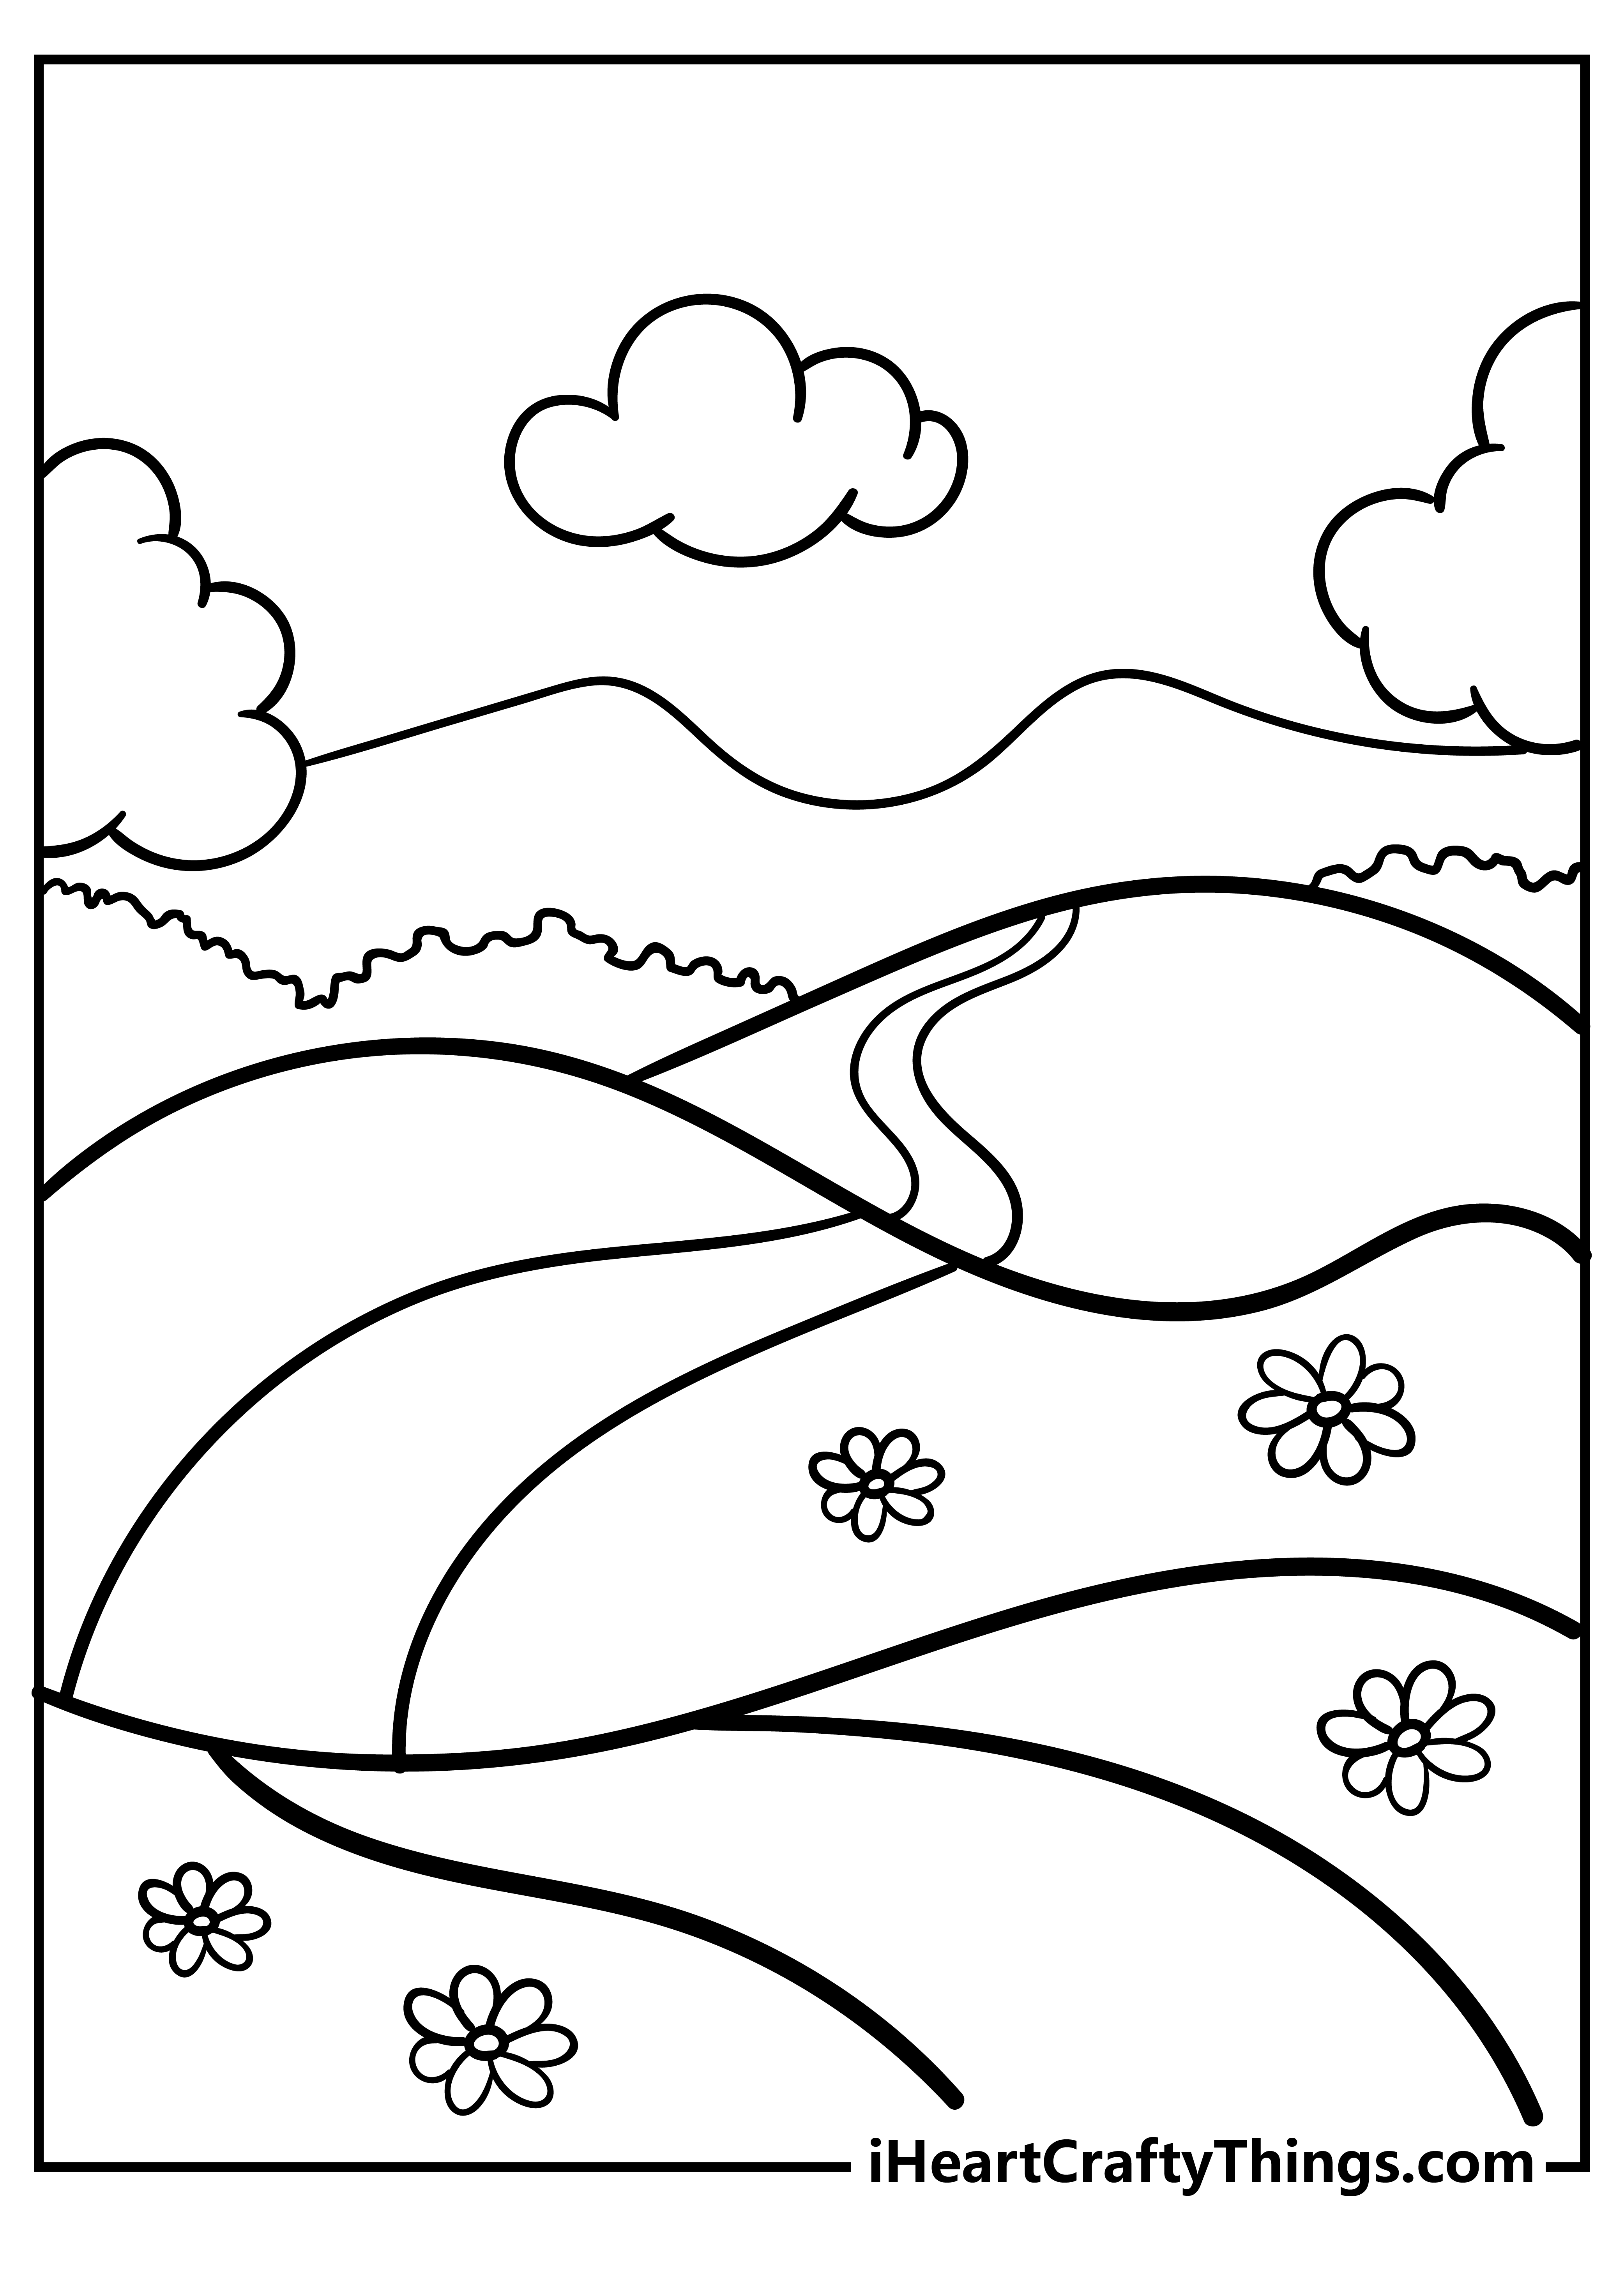 Printable Nature Coloring Pages Updated 20